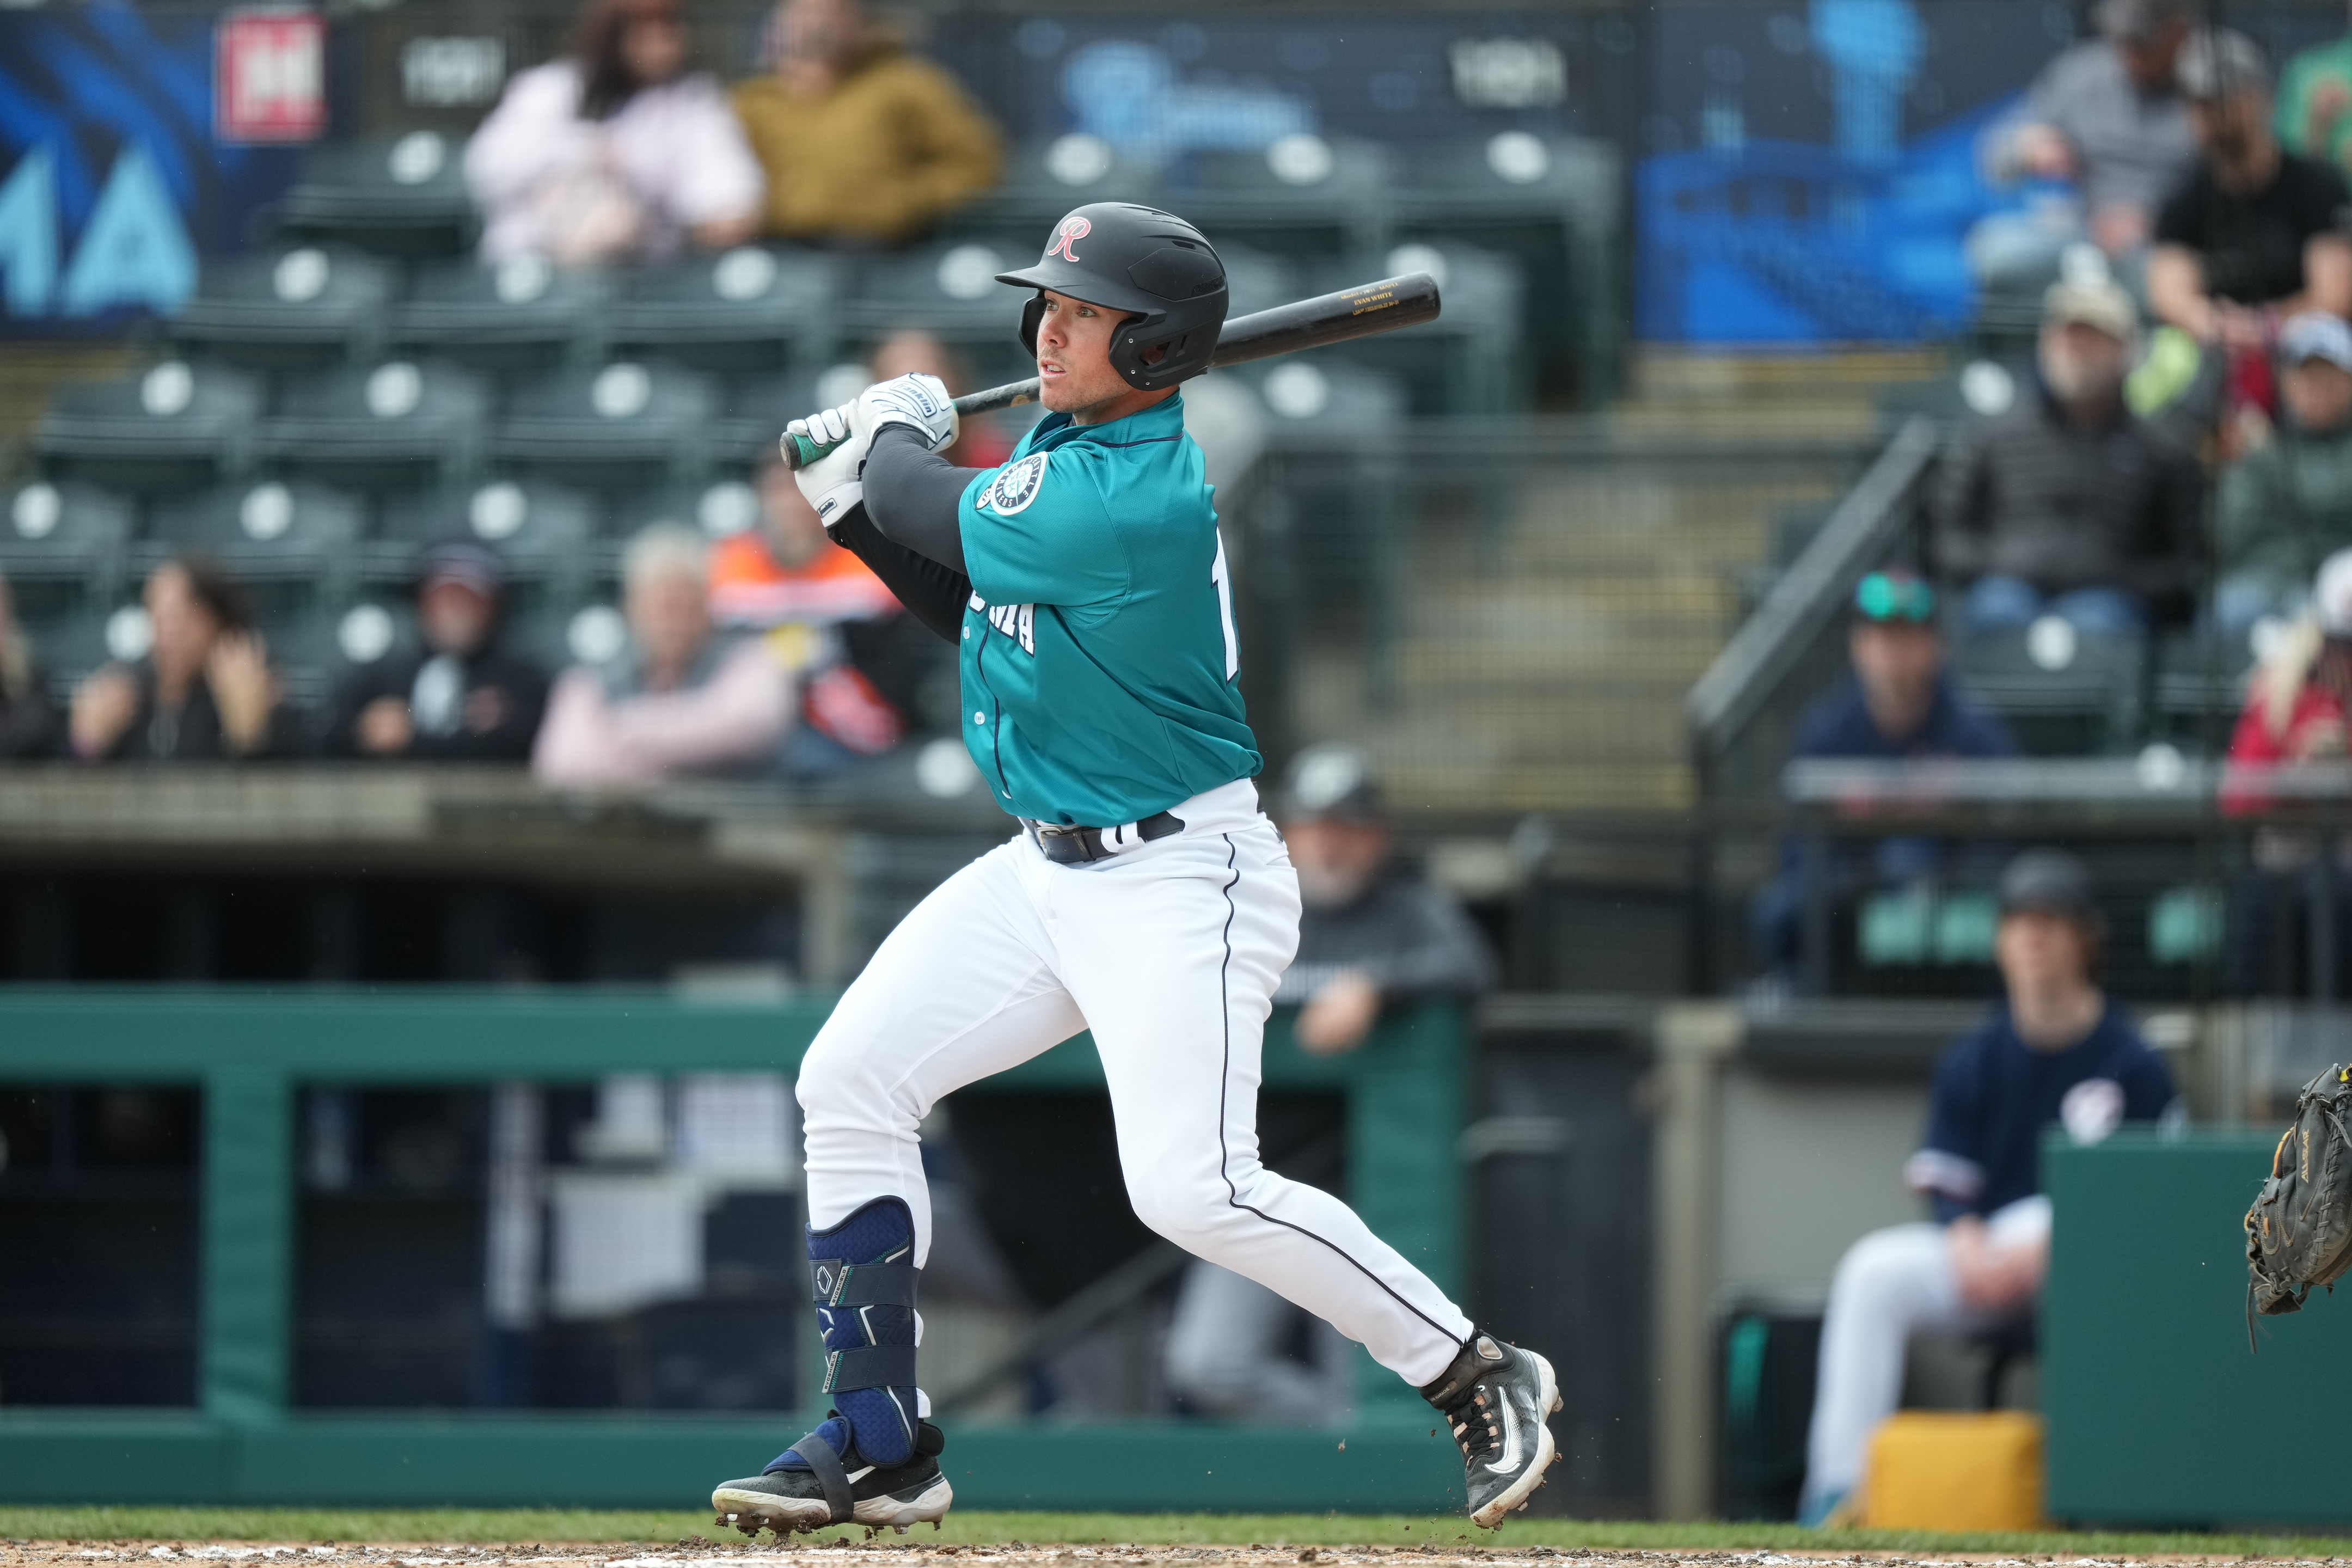 Tacoma Walks off Vegas in Extra-Inning Thriller - OurSports Central